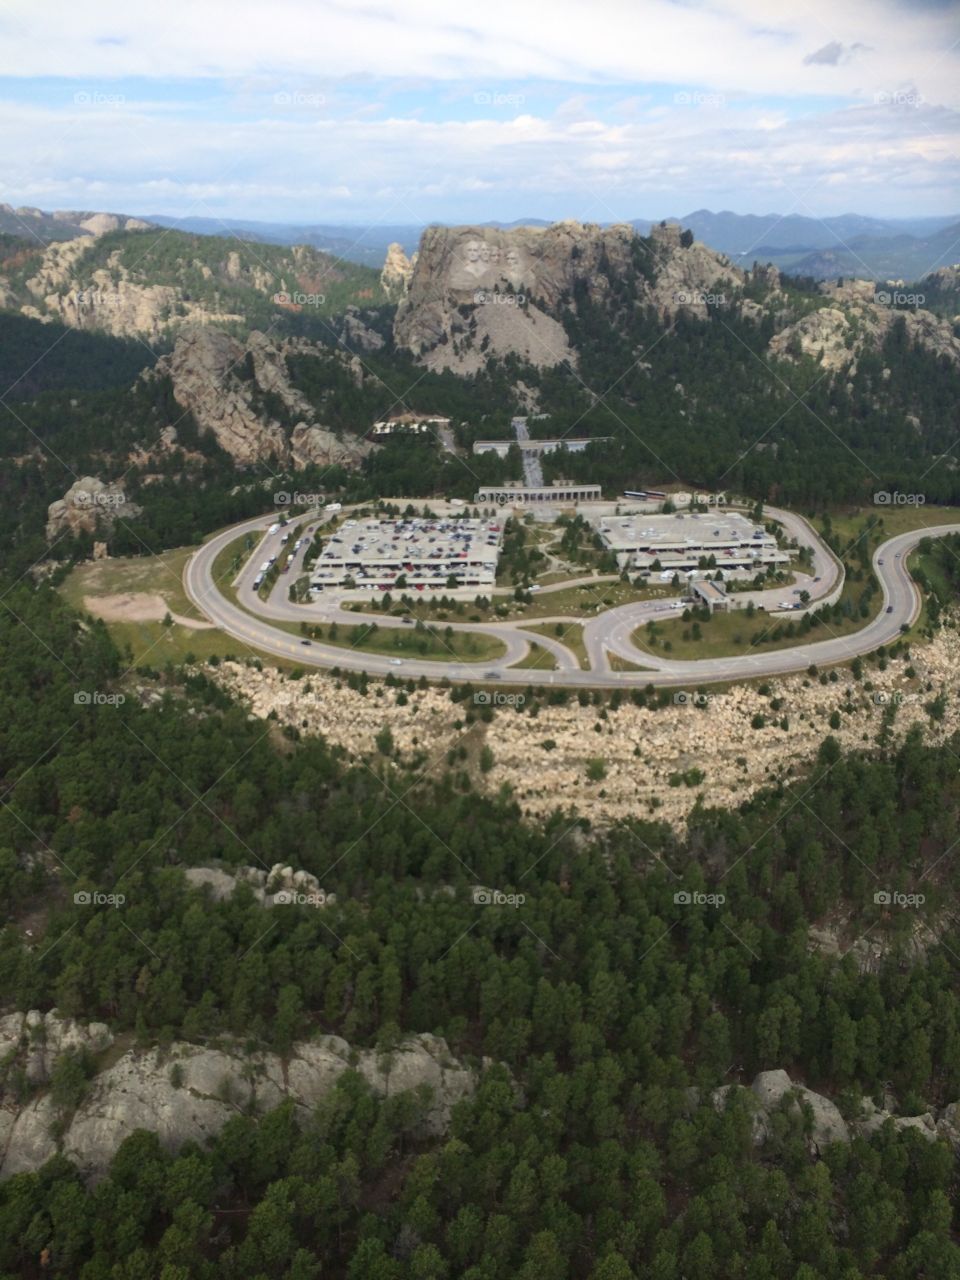 Mt. Rushmore National Memorial, Keystone, South Dakota, taken from a helicopter over the Black Hills